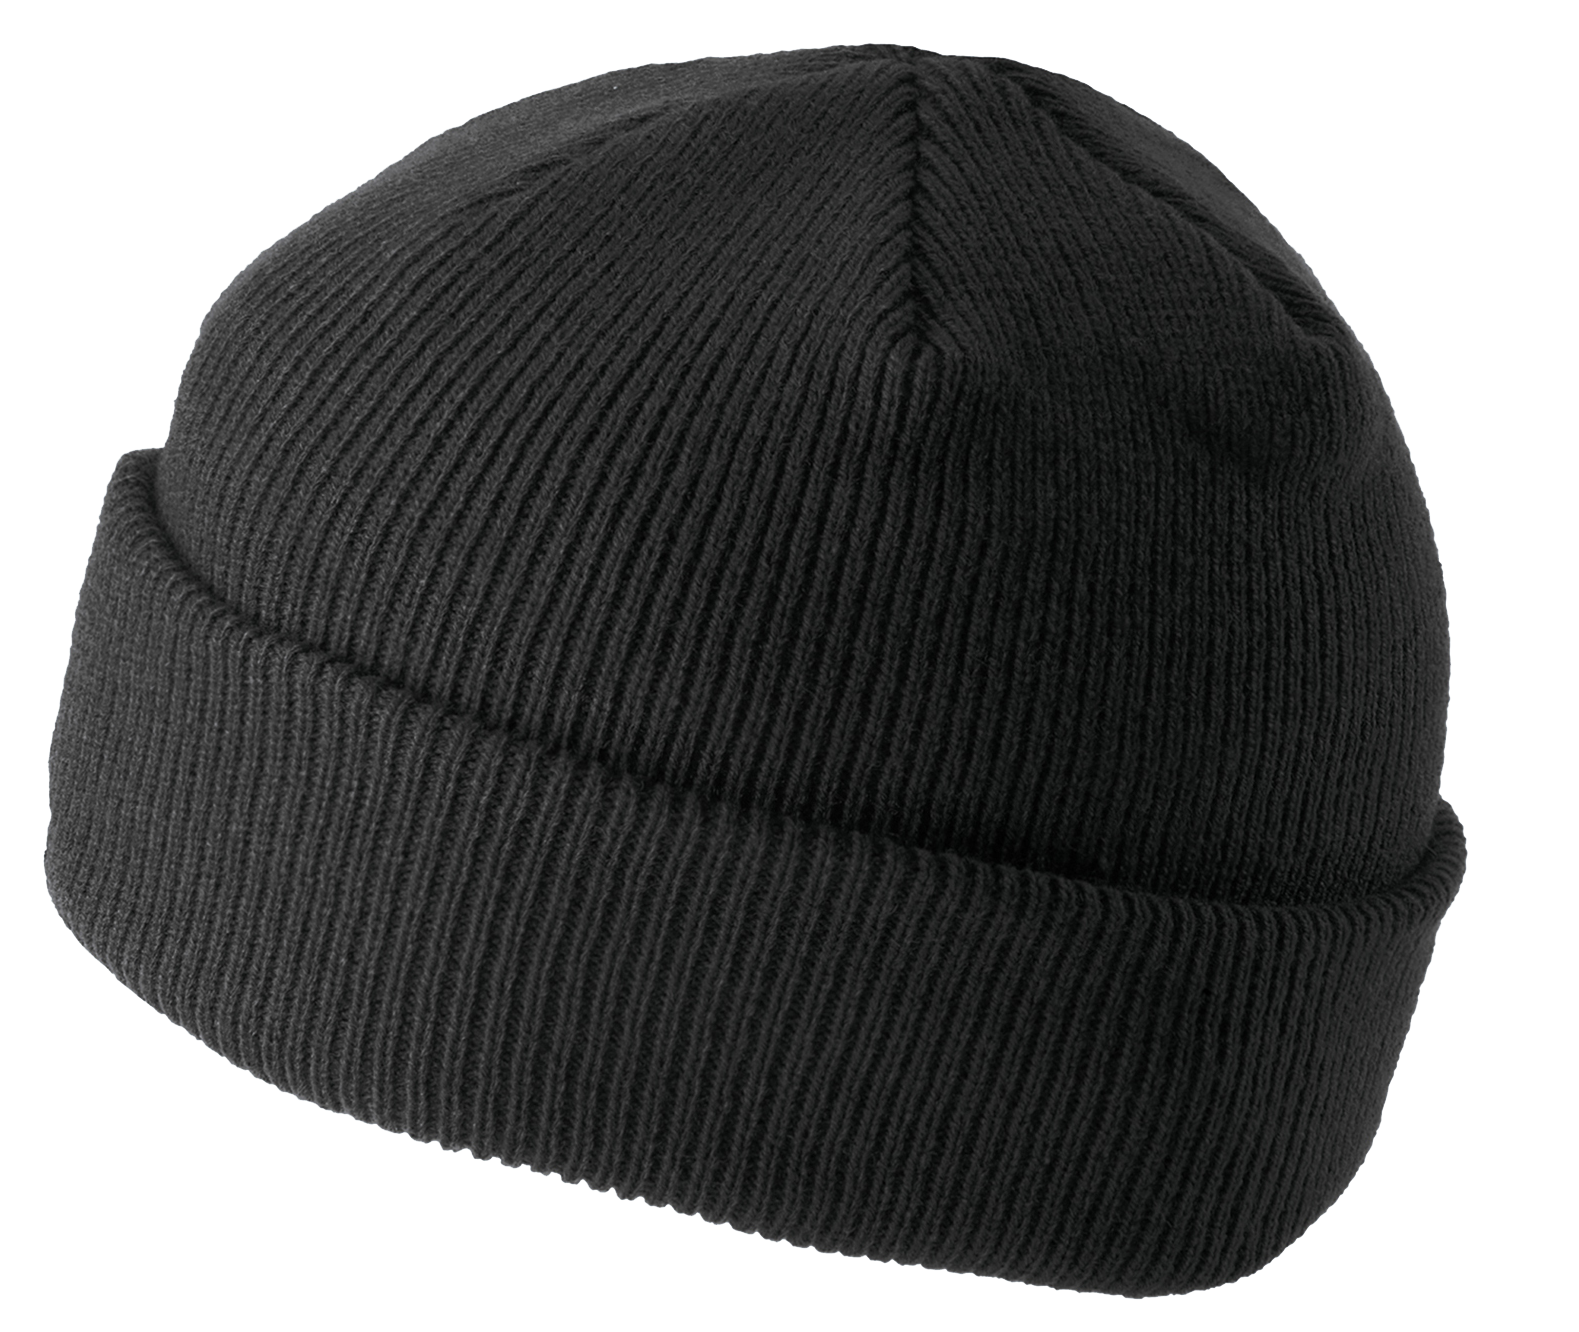 Beanie Photos PNG Image